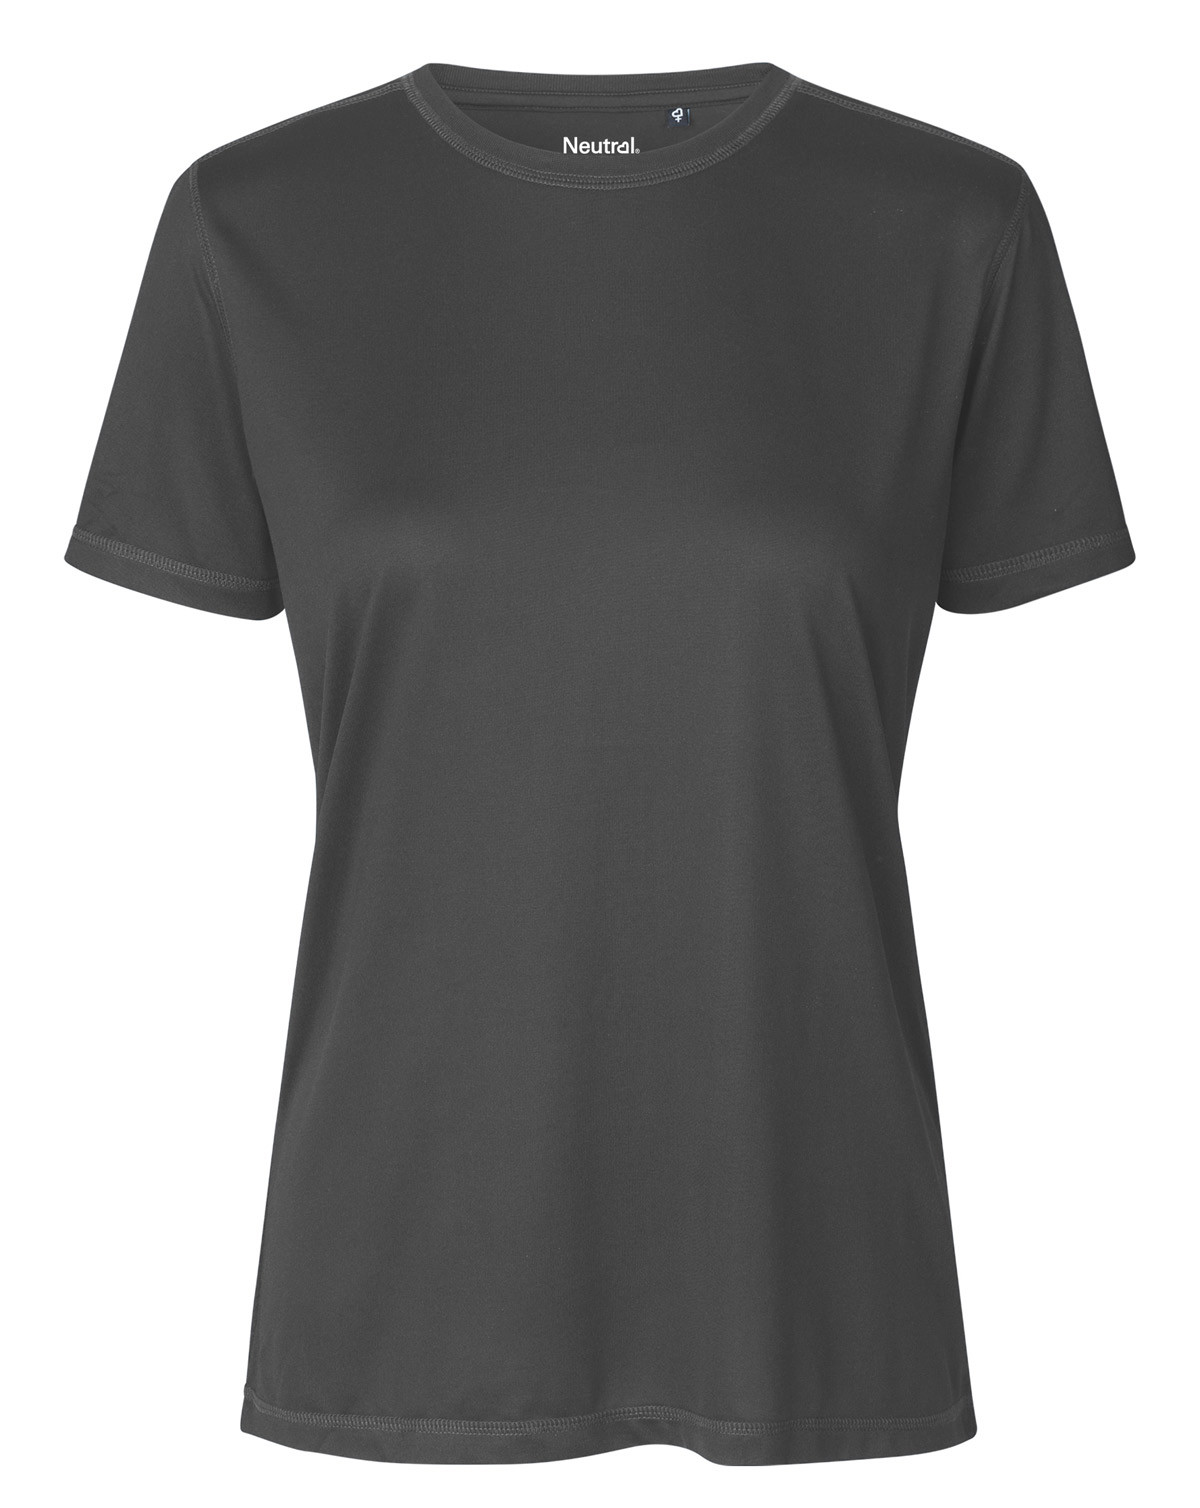 Billede af Neutral Organic - Ladies Recycled Performance T-shirt (Charcoal, M)